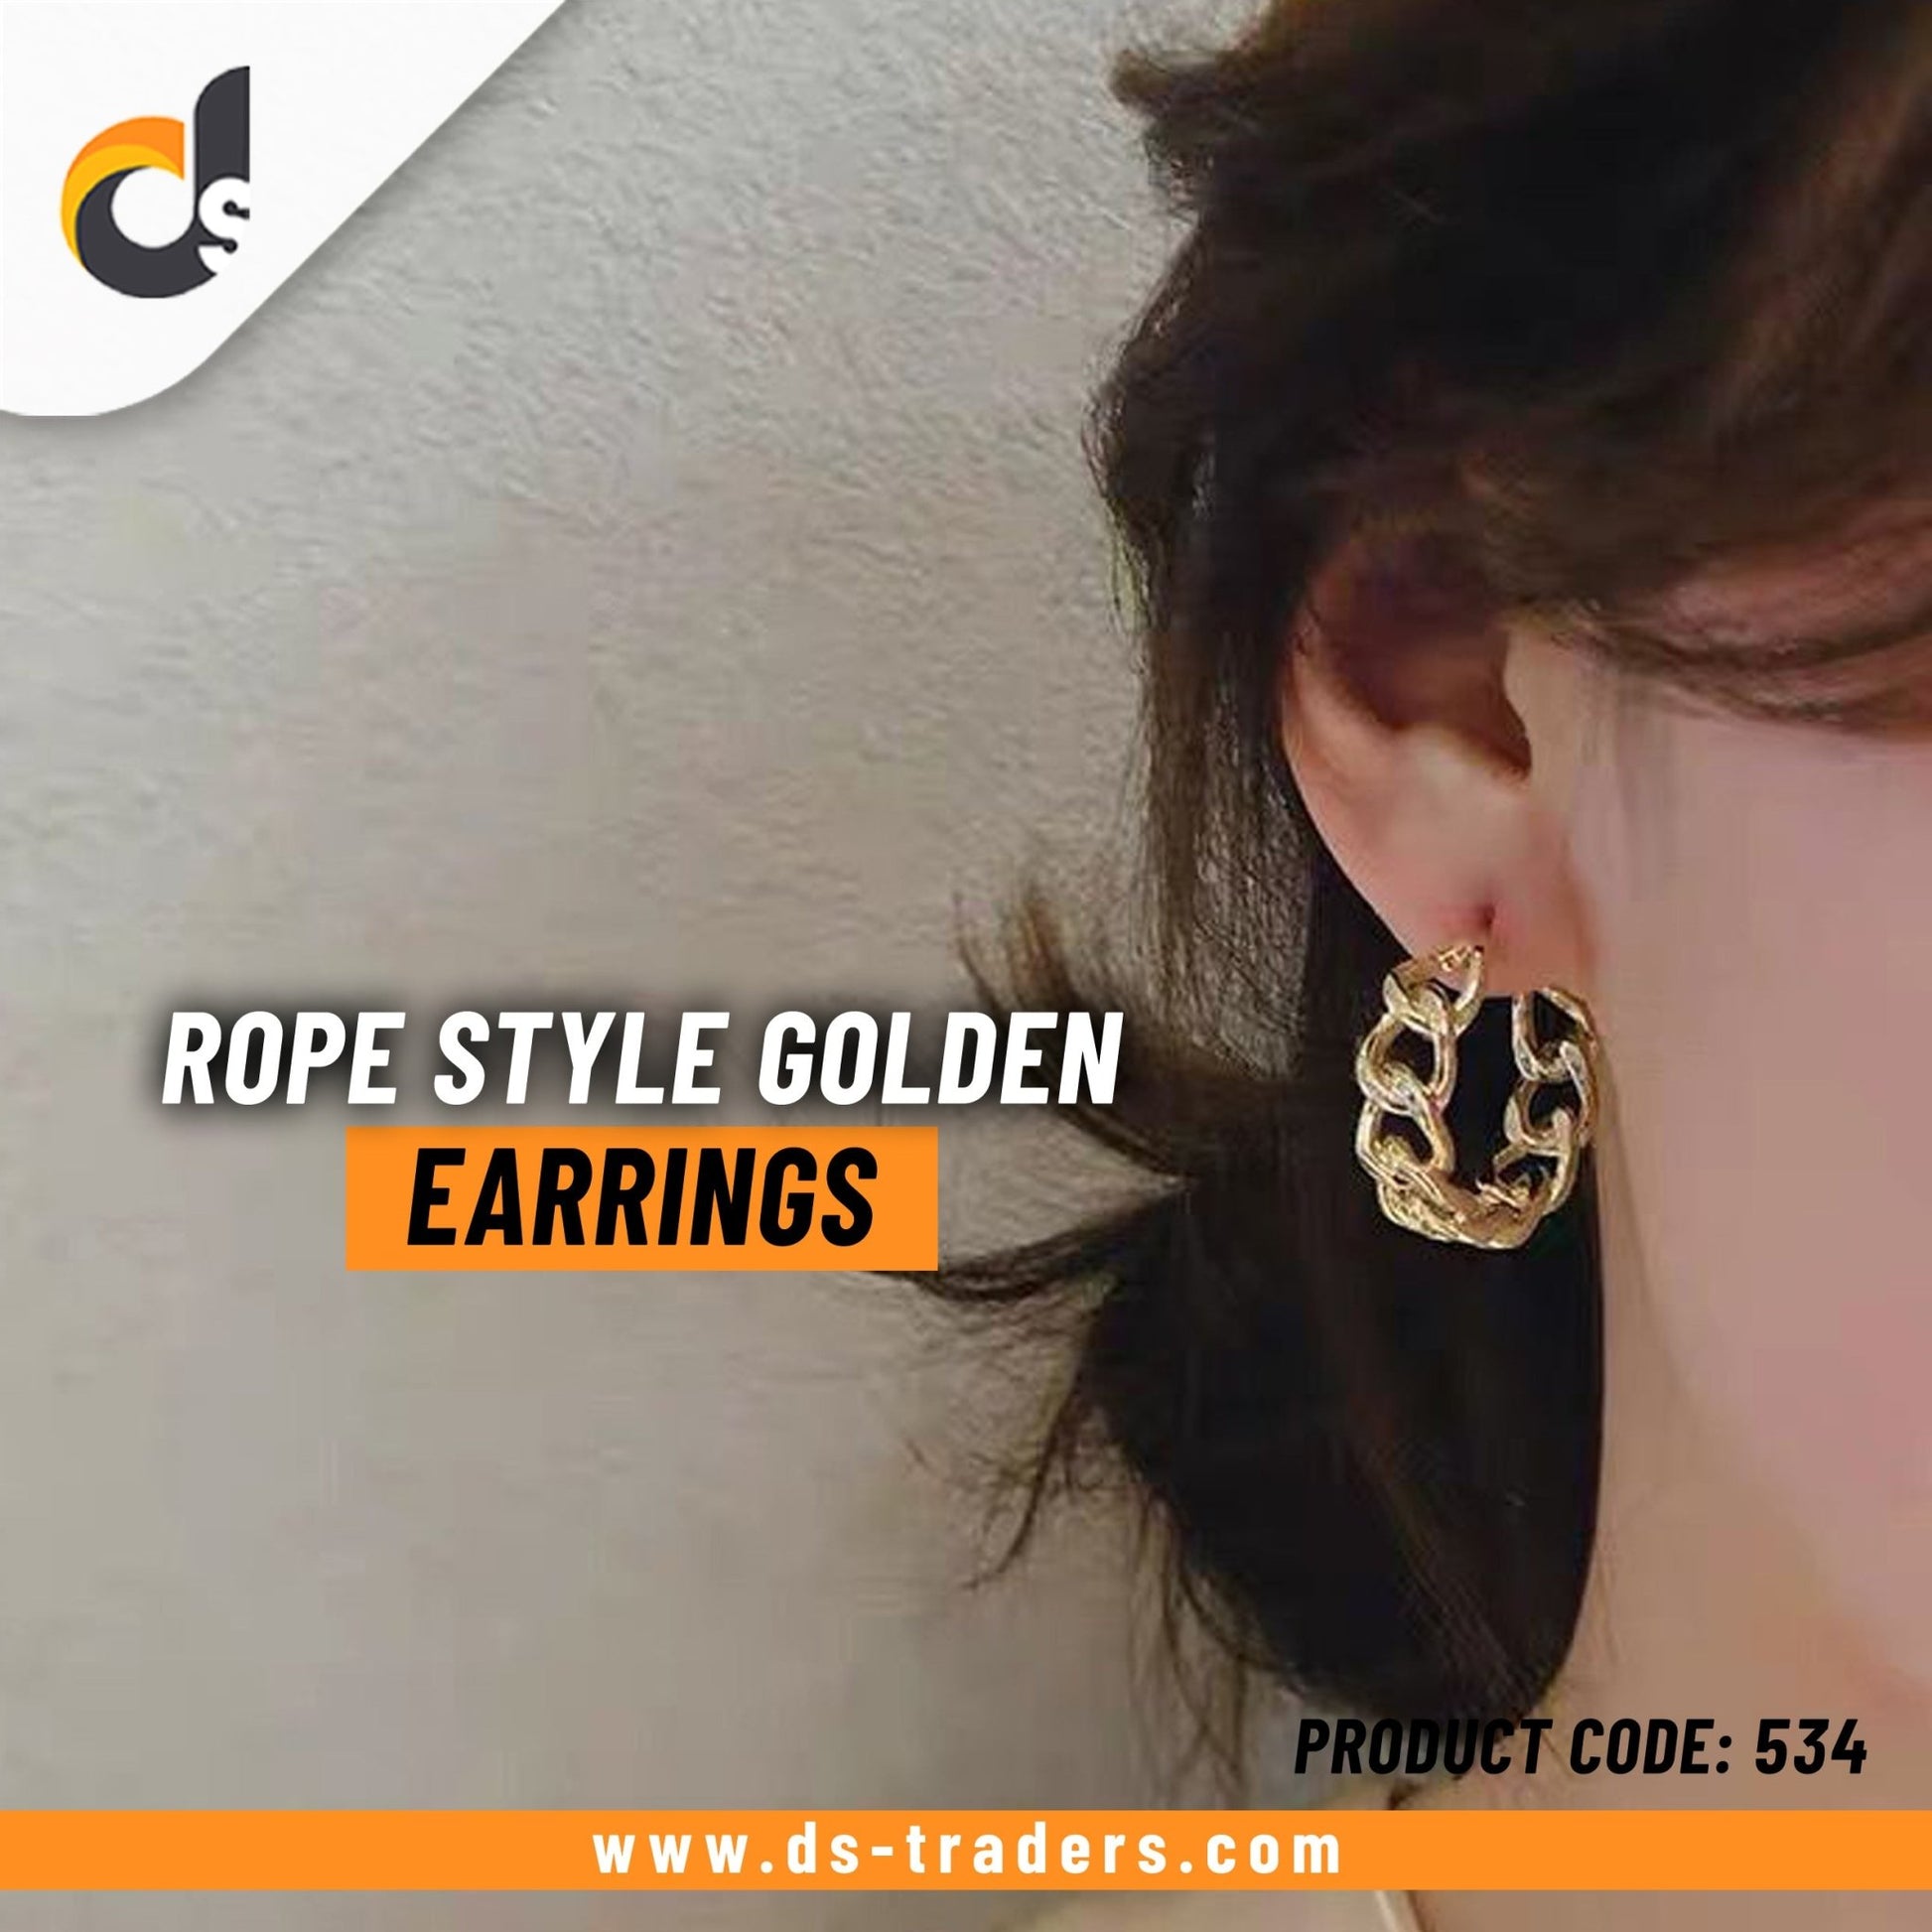 Rope Style Golden Earrings - DS Traders